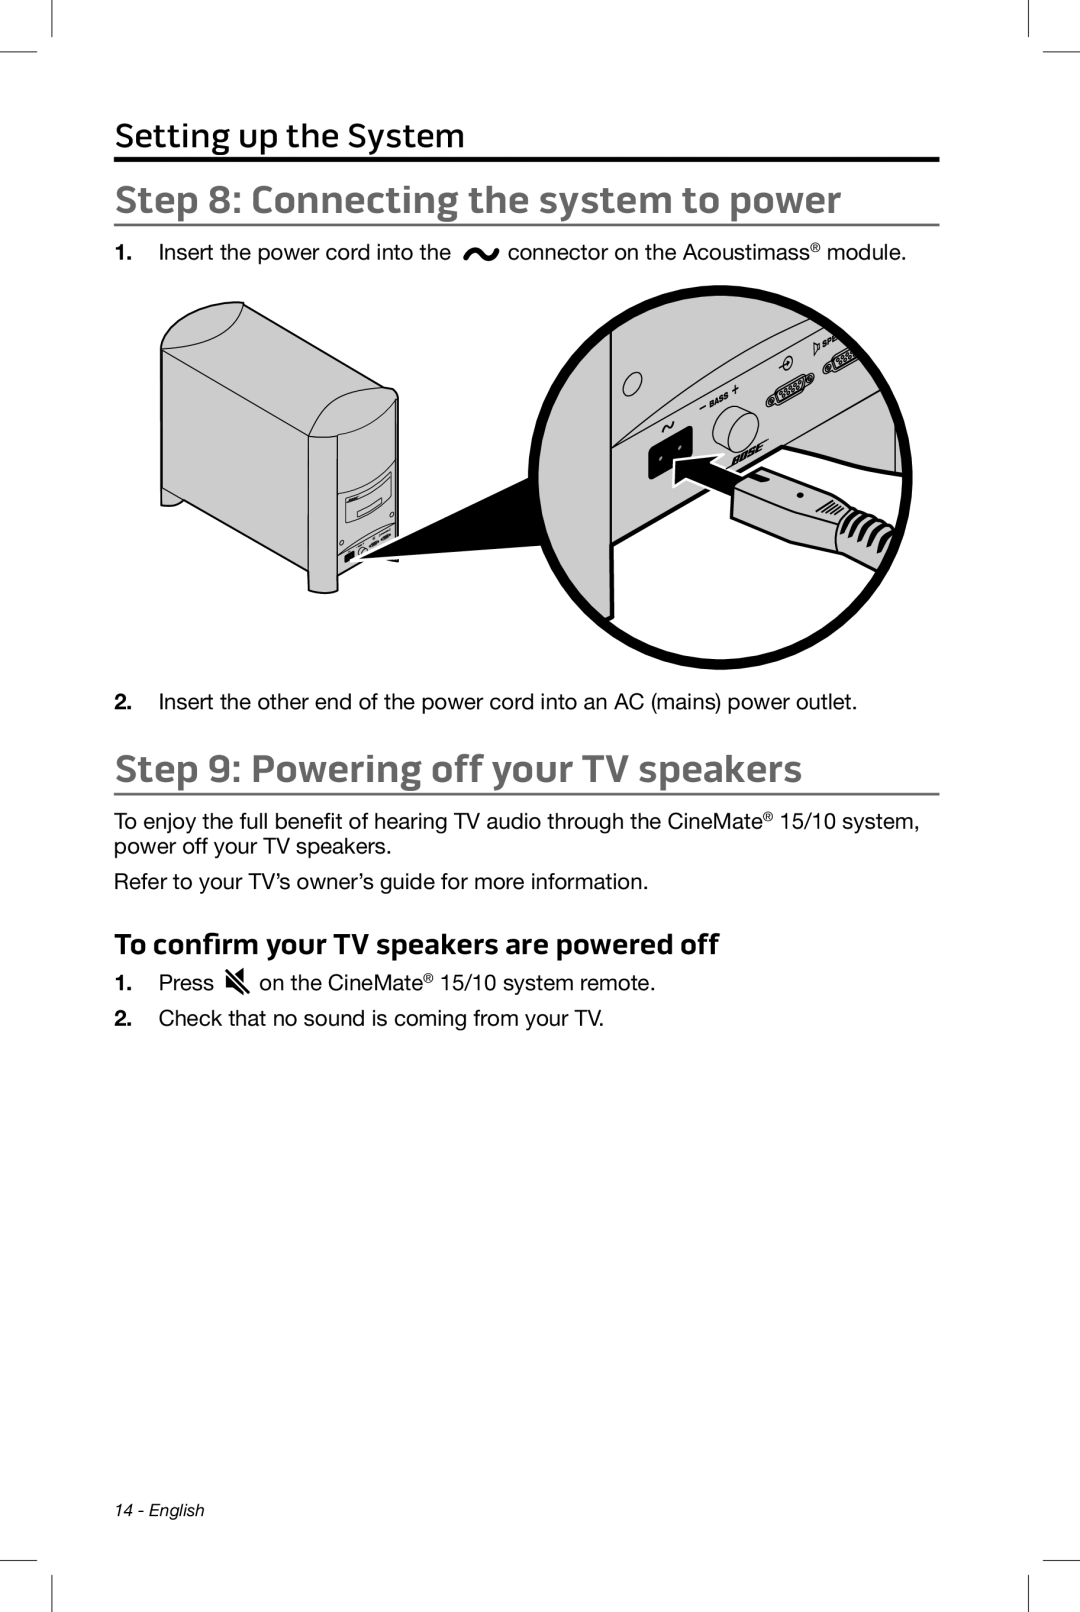 Bose CineMate 15/10 manual Connecting the system to power, Powering off your TV speakers, Setting up the System 